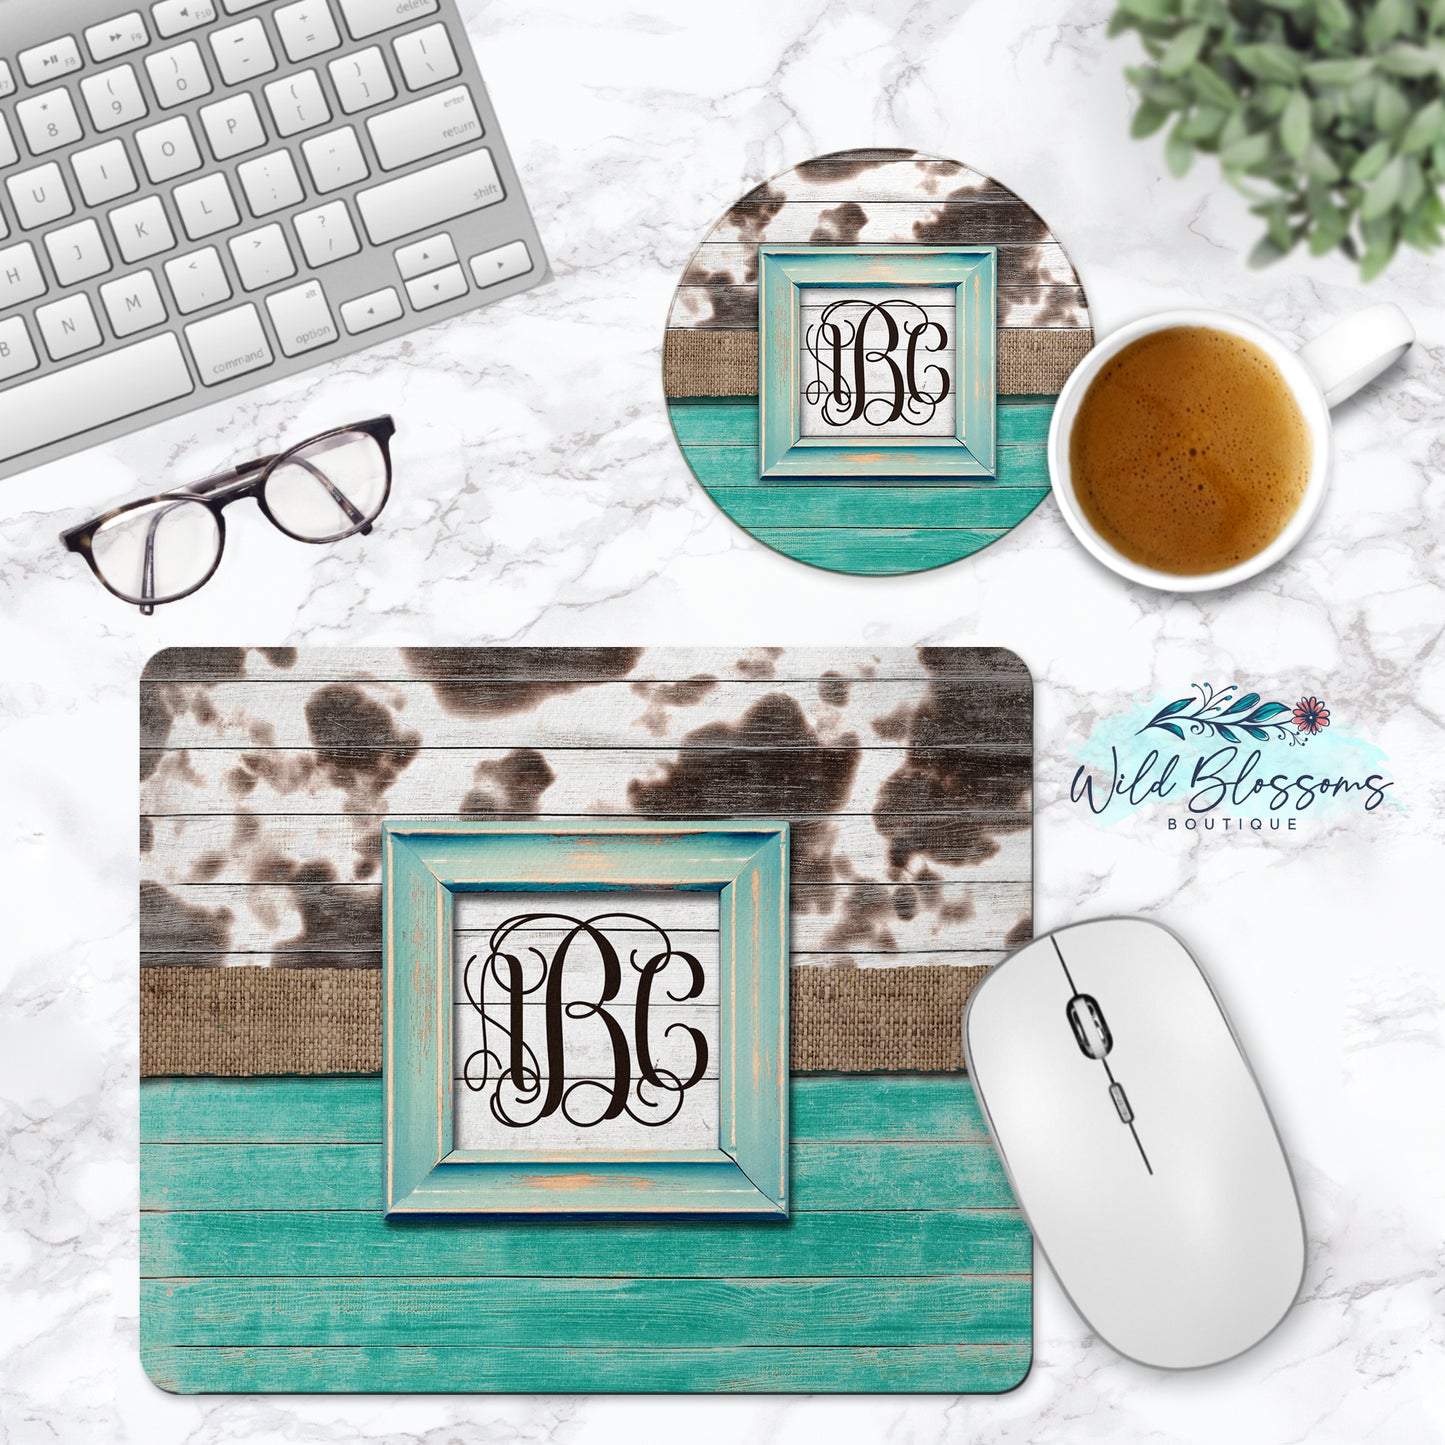 Wooden Turquoise And Cow Print Personalized Mouse Pad And Coaster Desk Set